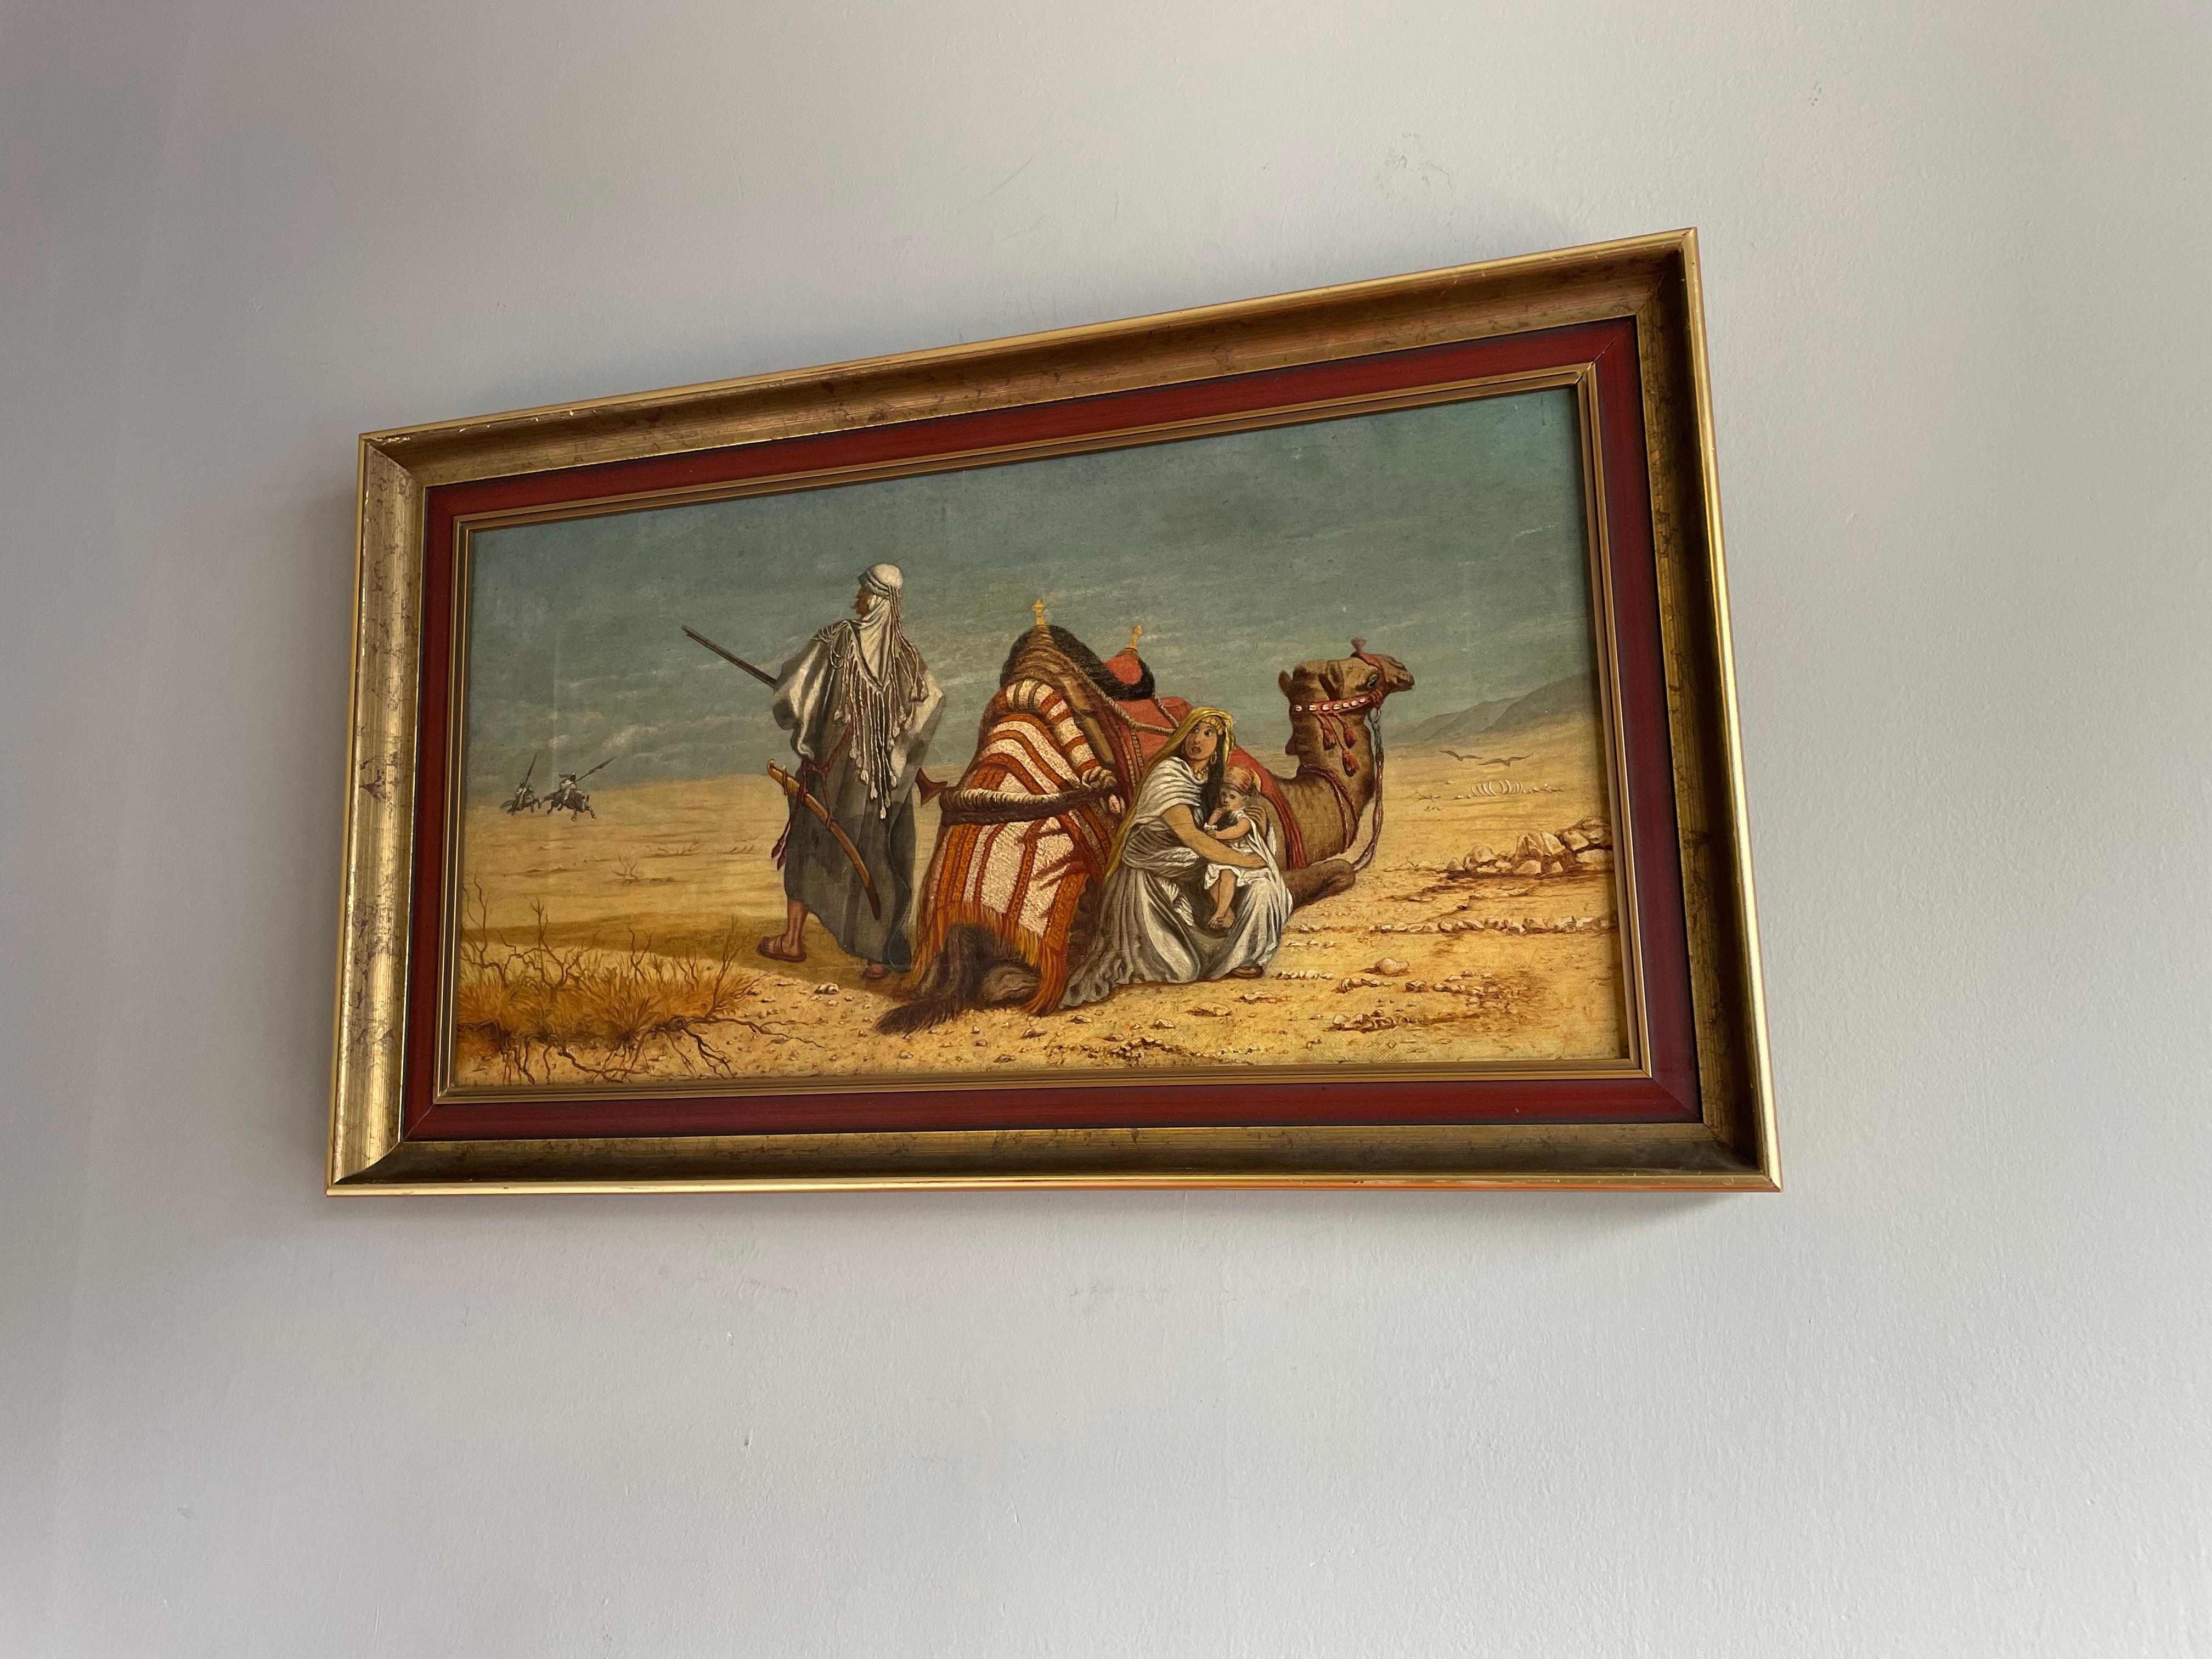 Antiquities Oil on Canvas Painting Arabic Male & Camel in Desert Protecting Spouse en vente 3